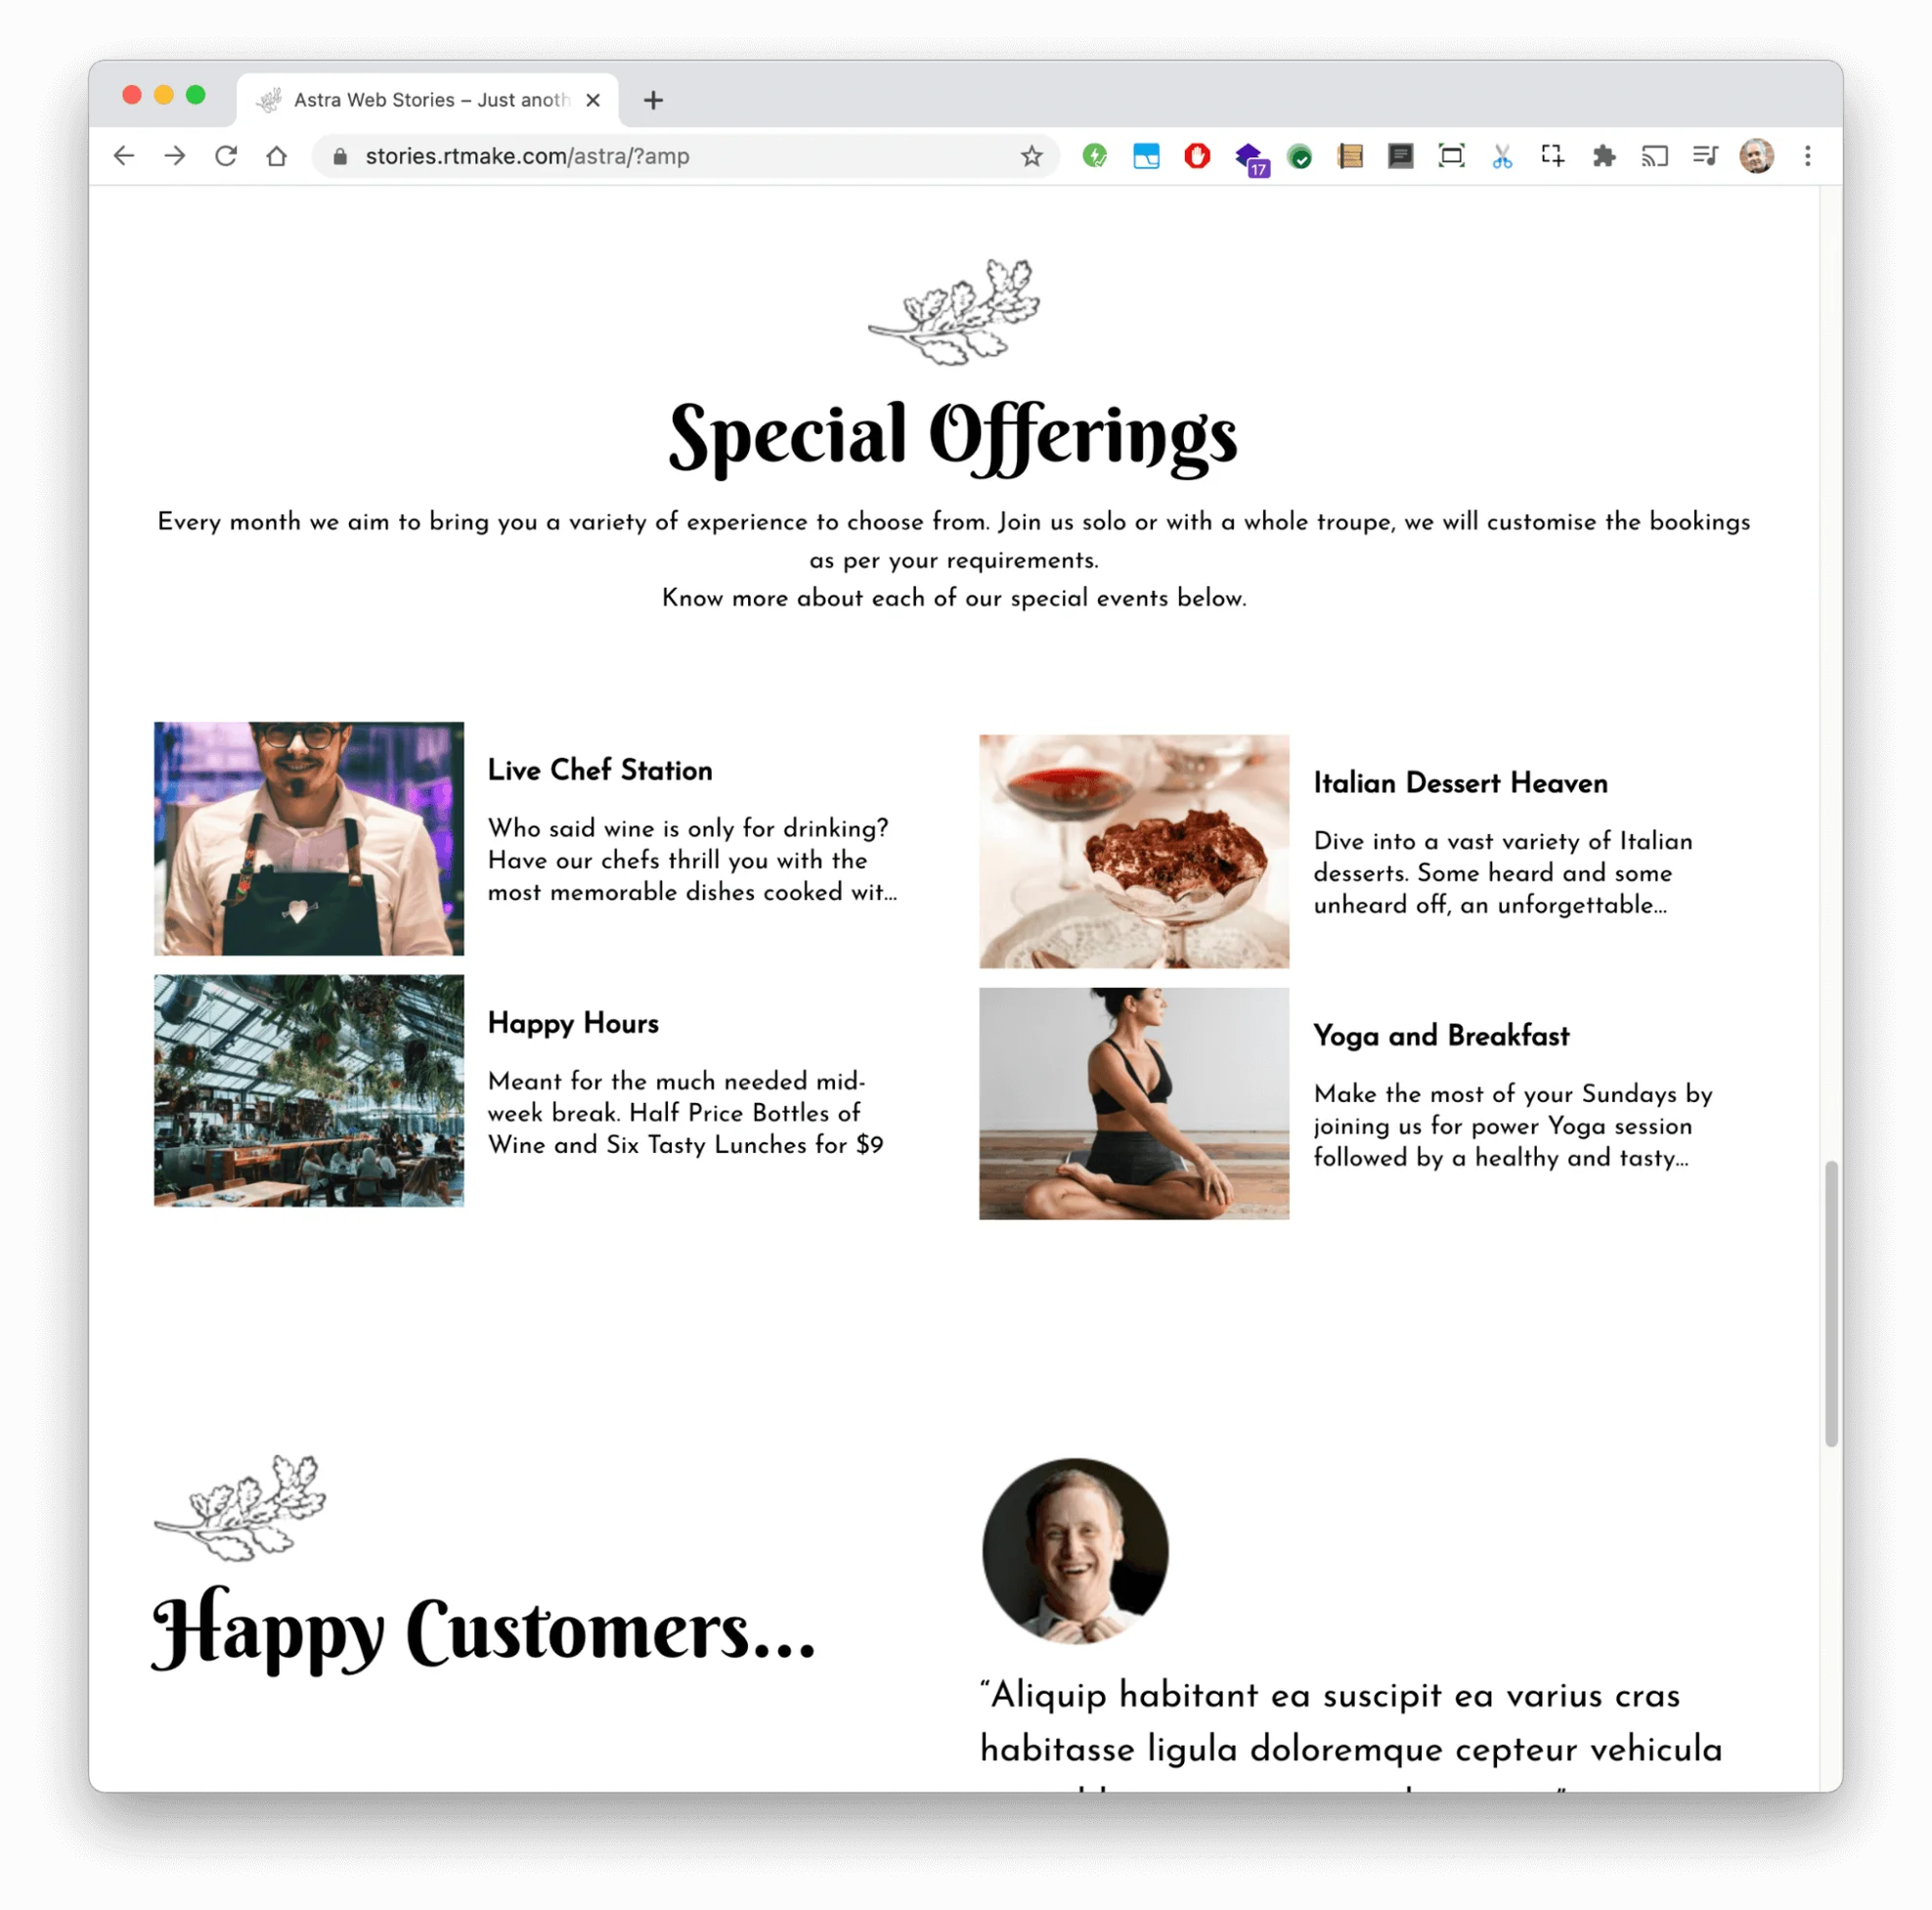 The special offerings page of a restaurant website with a 4 by 4 grid of content including dessert, happy hours, and a live chef station.